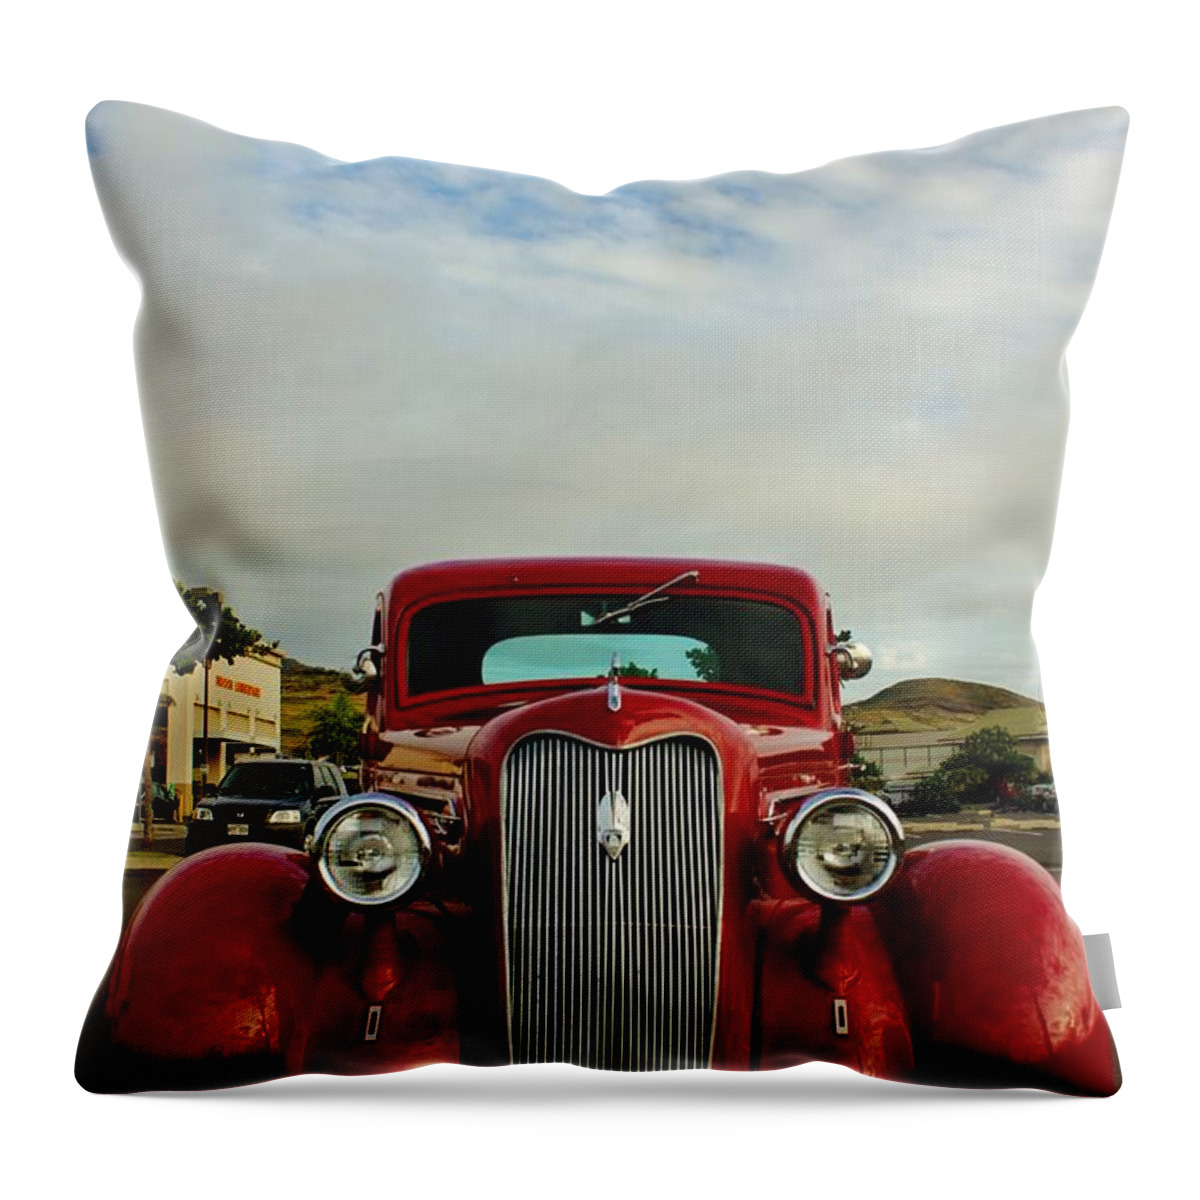 1936 Throw Pillow featuring the photograph 1936 Plymouth by Craig Wood